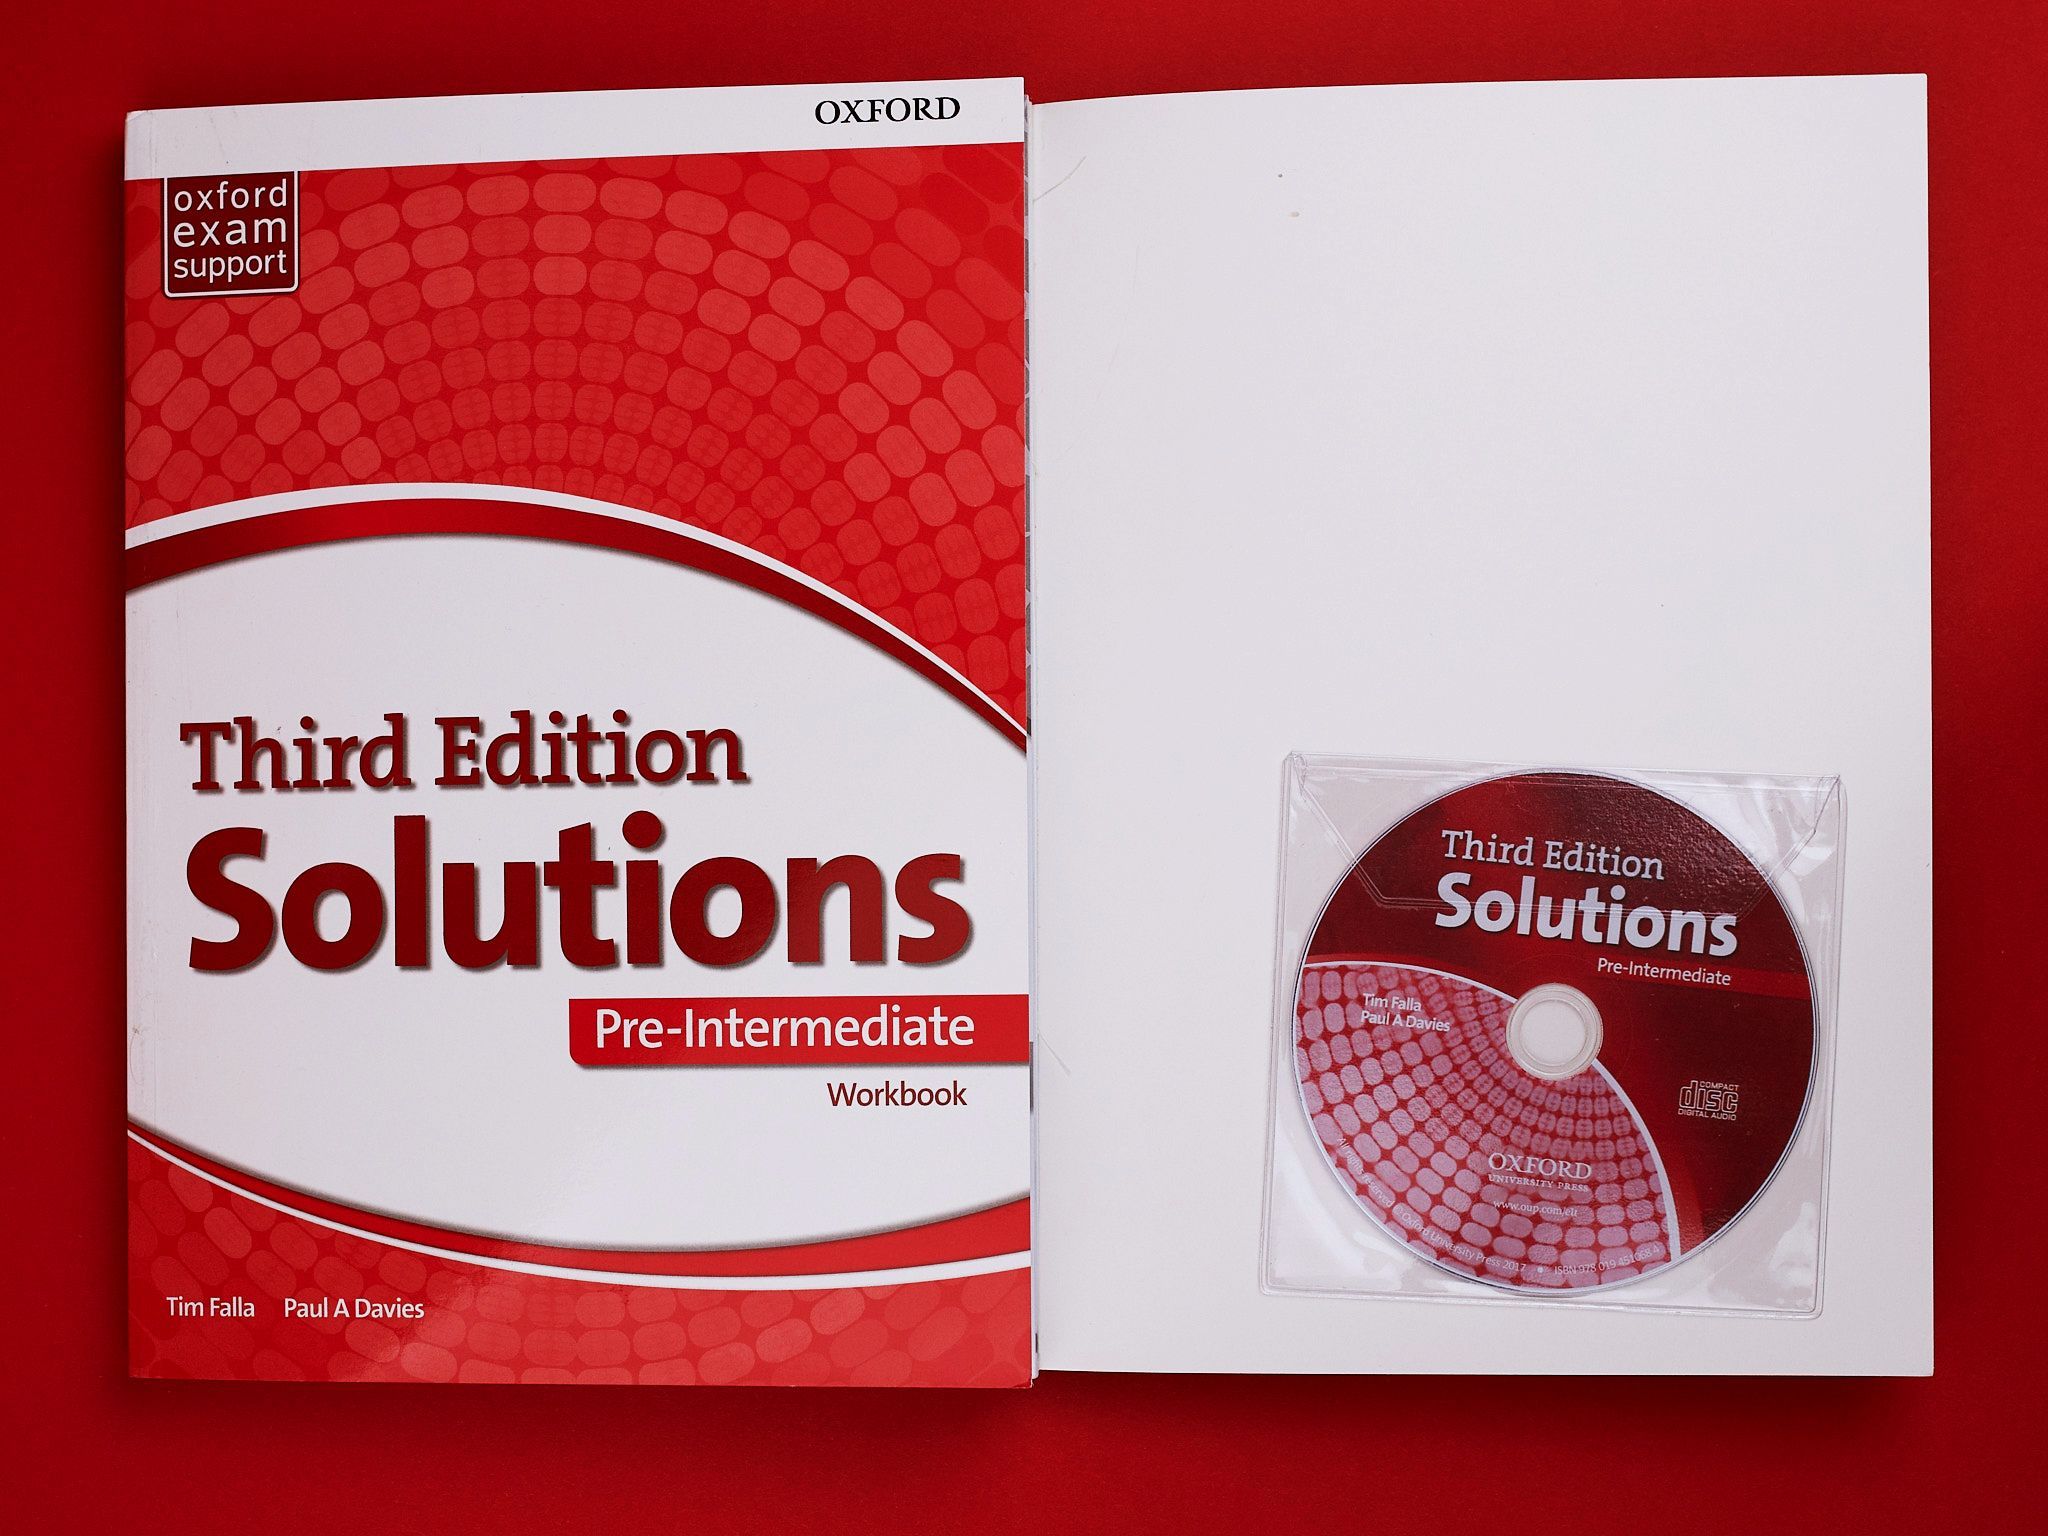 Solutions 3 edition tests. Solutions: pre-Intermediate. Solution pre Intermediate 3тd Edition Workbook. Solutions pre-Intermediate 3rd Edition students book “Grammar Builder”. Solutions pre-Intermediate 3c advertising ppt.